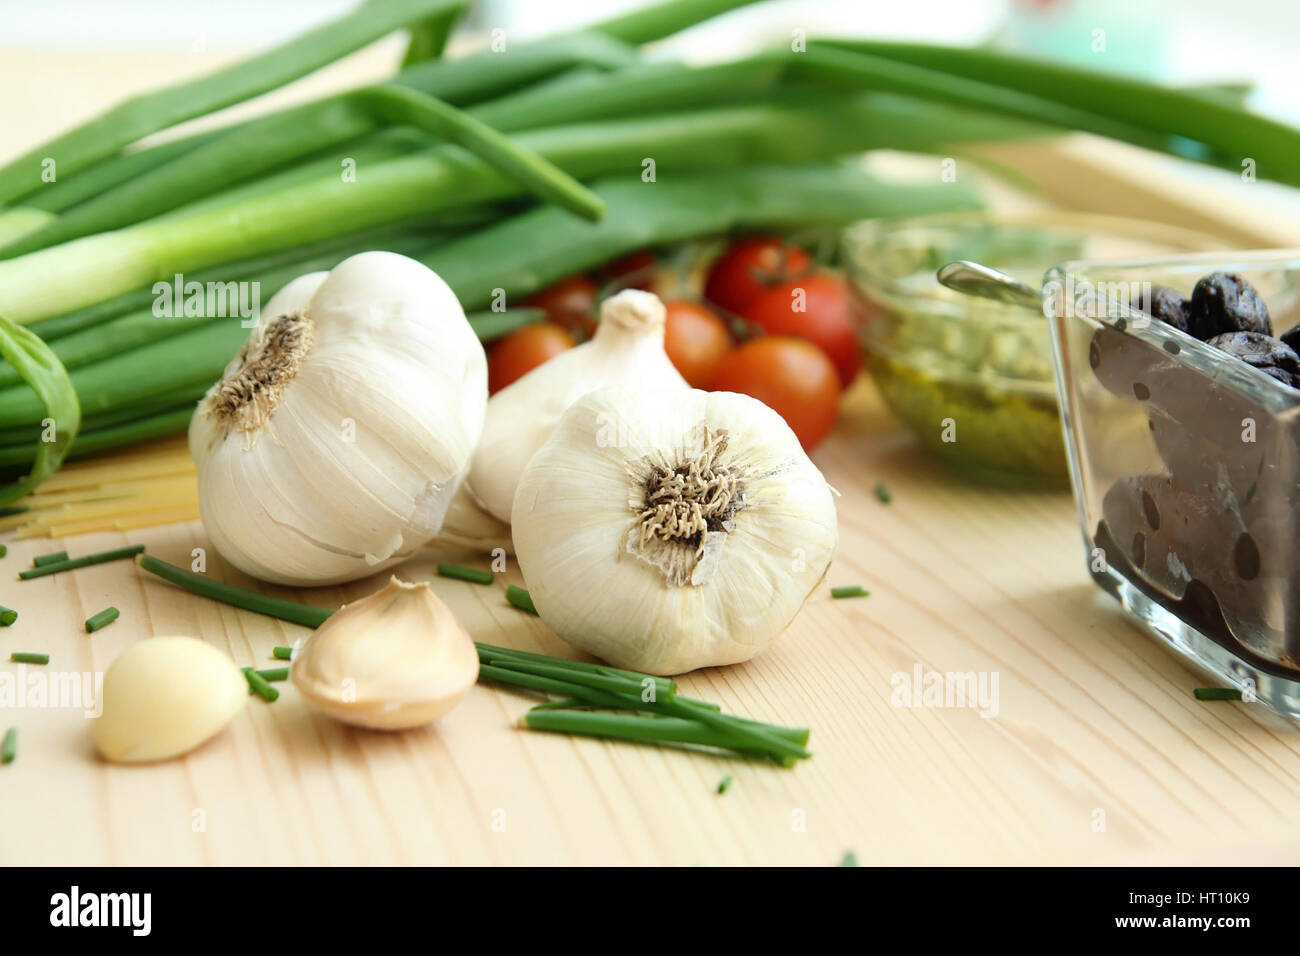 garlic cloves, onion and tomatoes Stock Photo